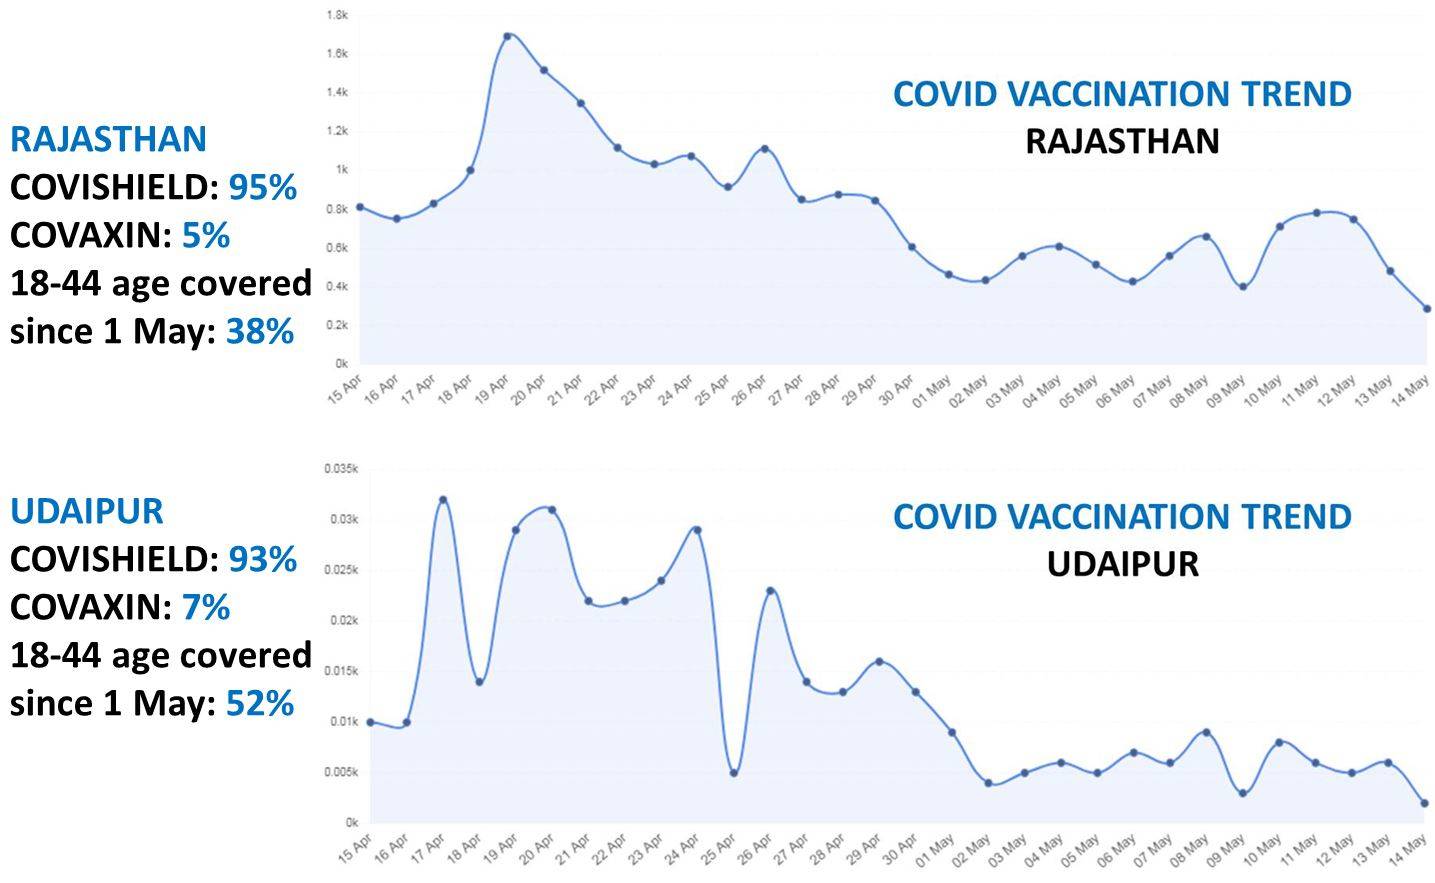 Internet Penetration versus Vaccine Propagation - Mobilising Vaccination over Internet will not work in Rural Rajasthan